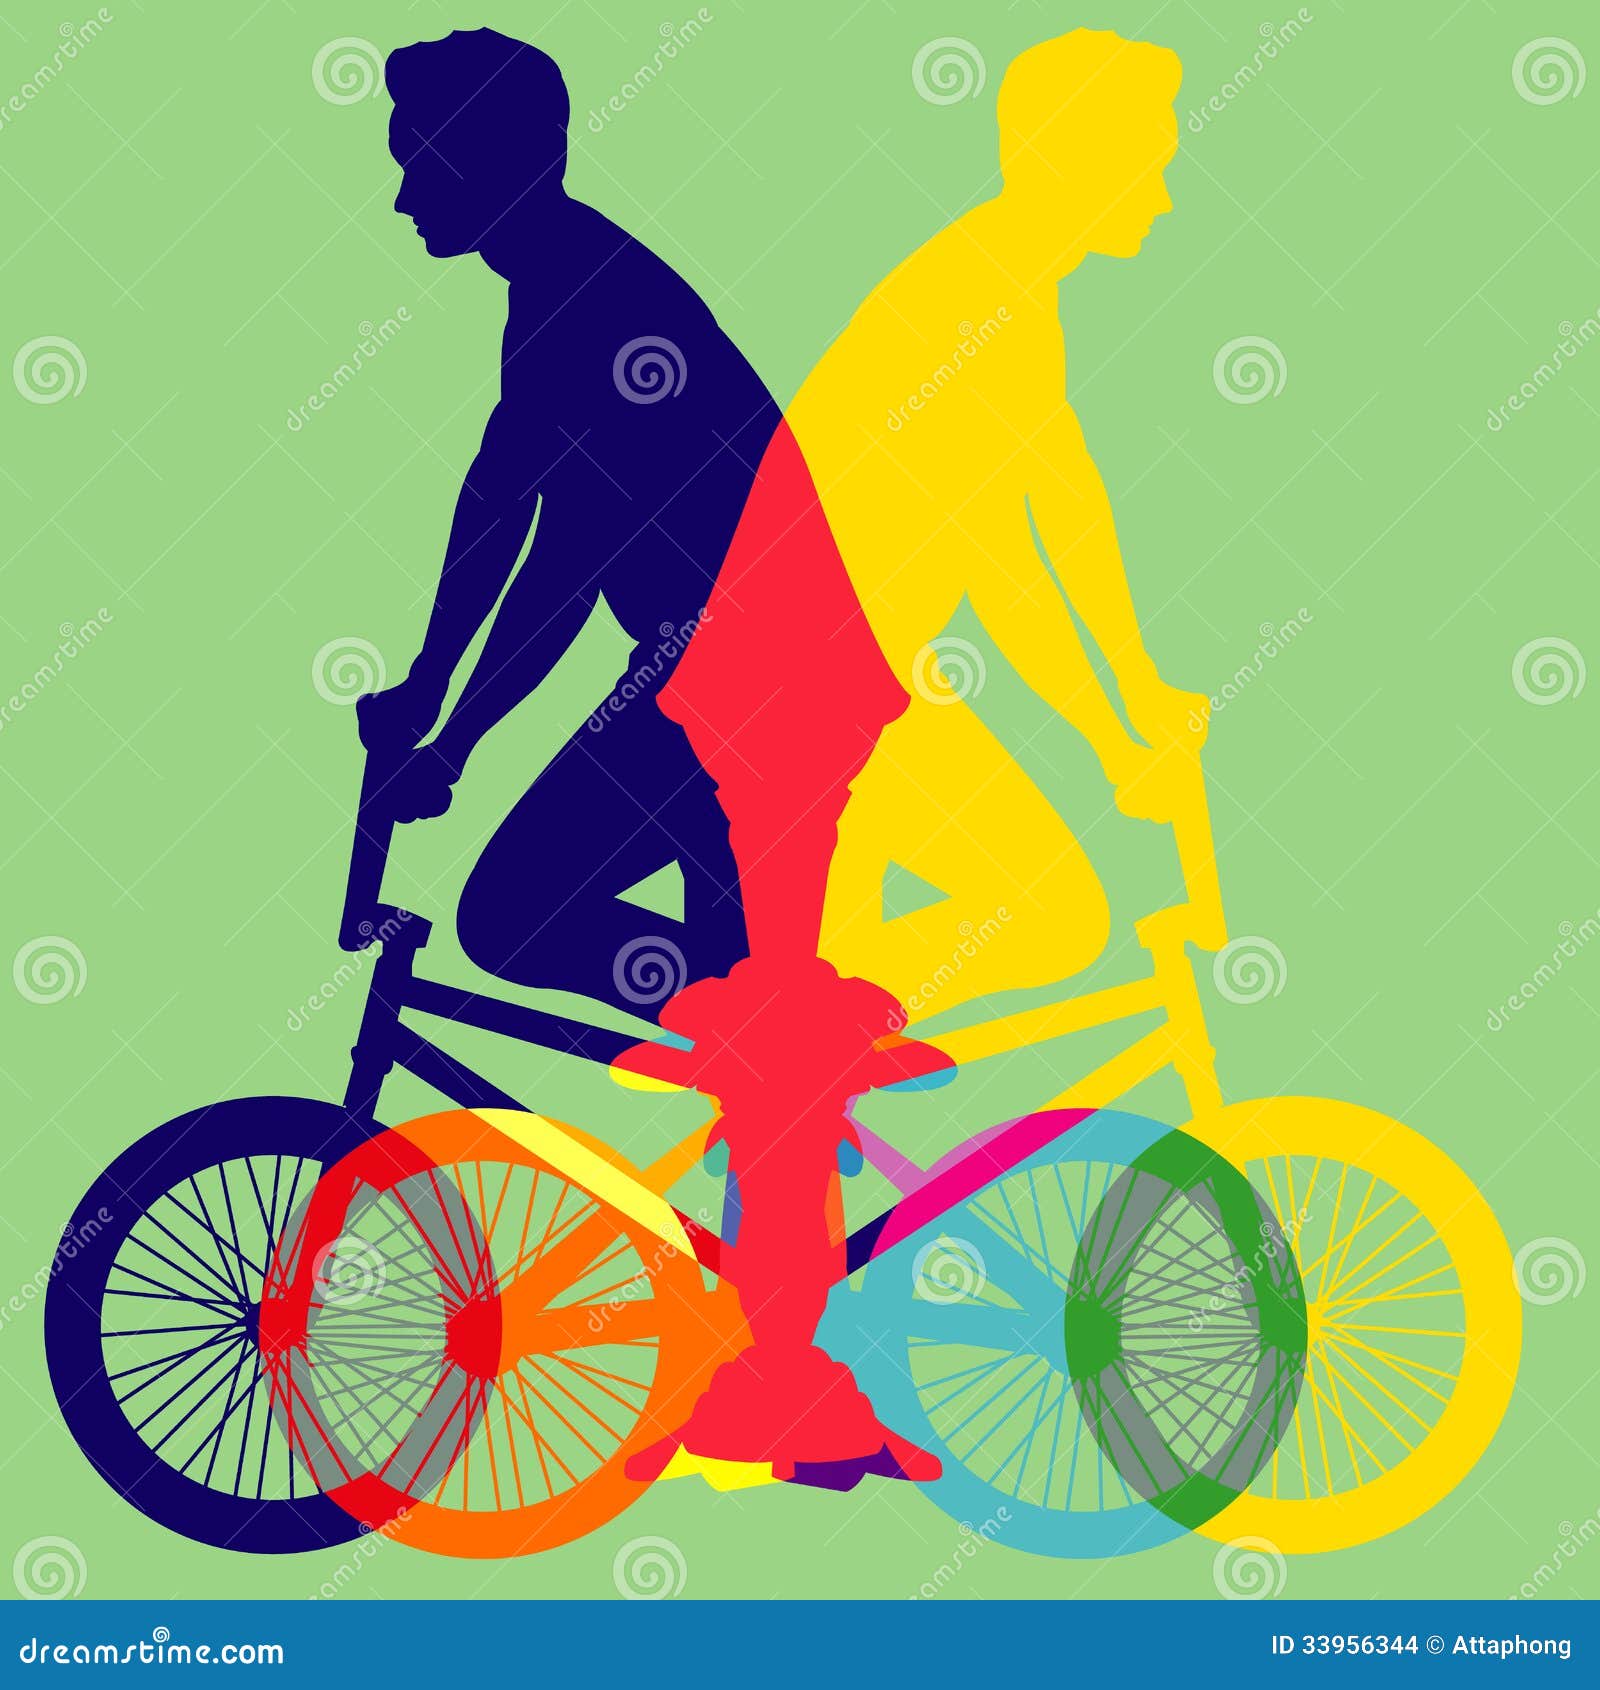 Bicycle colorful vector isolated on green background - Illustration